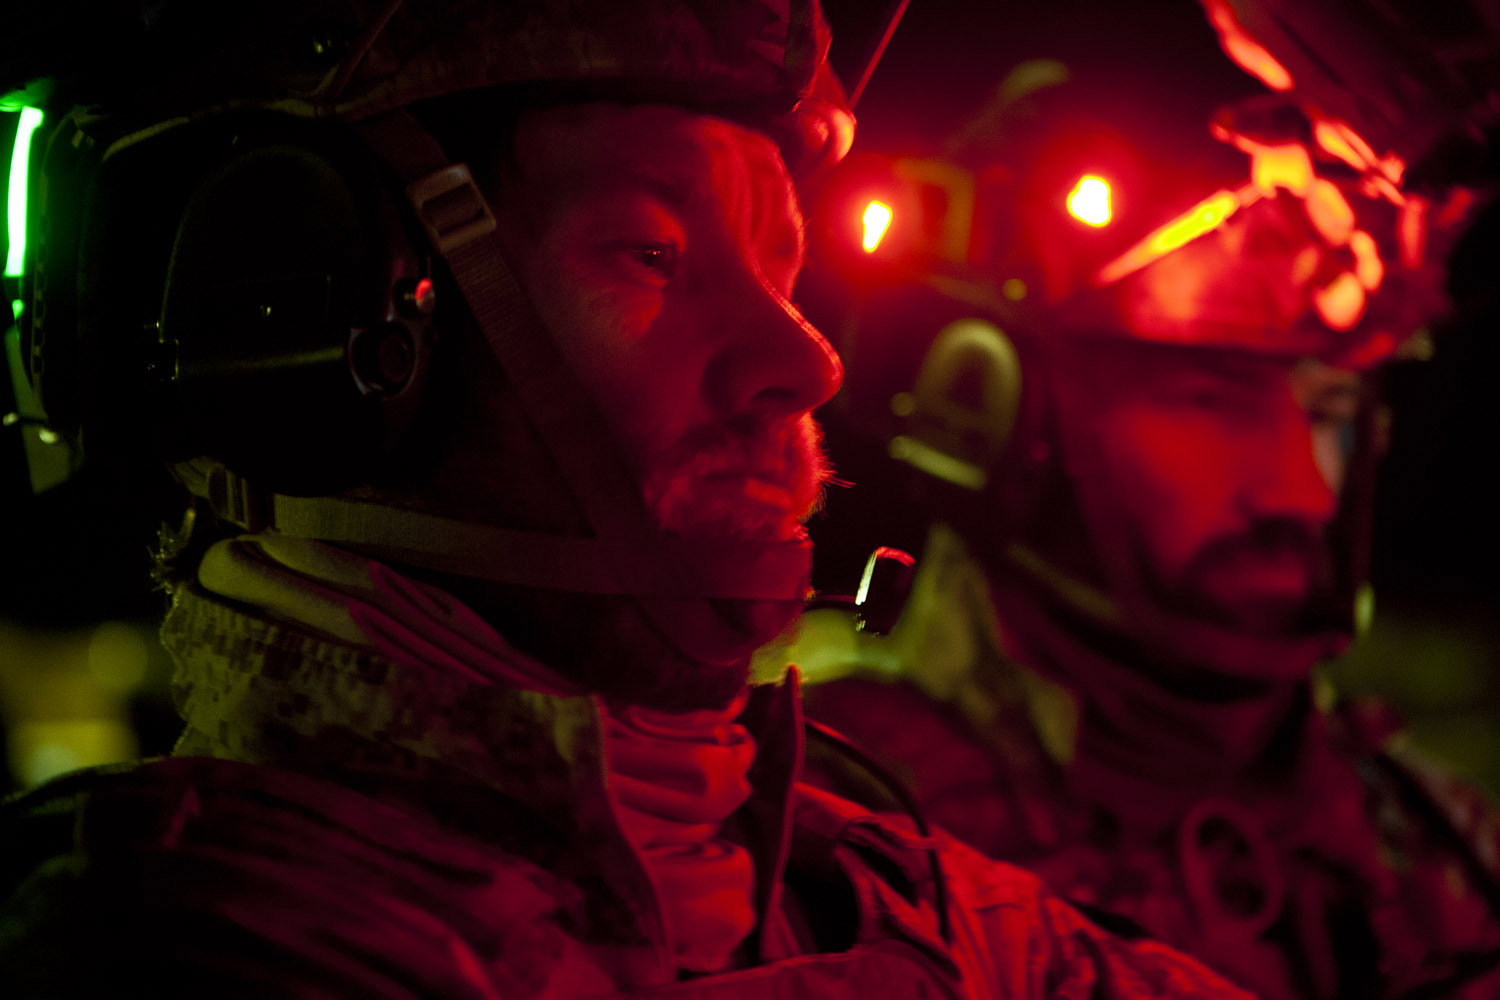 Flying a stealth blackhawk helicopter, Joel Edgerton (left), and his brother Nash Edgerton, play the SEAL Team Six soldiers raiding Osama Bin Laden's compound in Zero Dark Thirty.